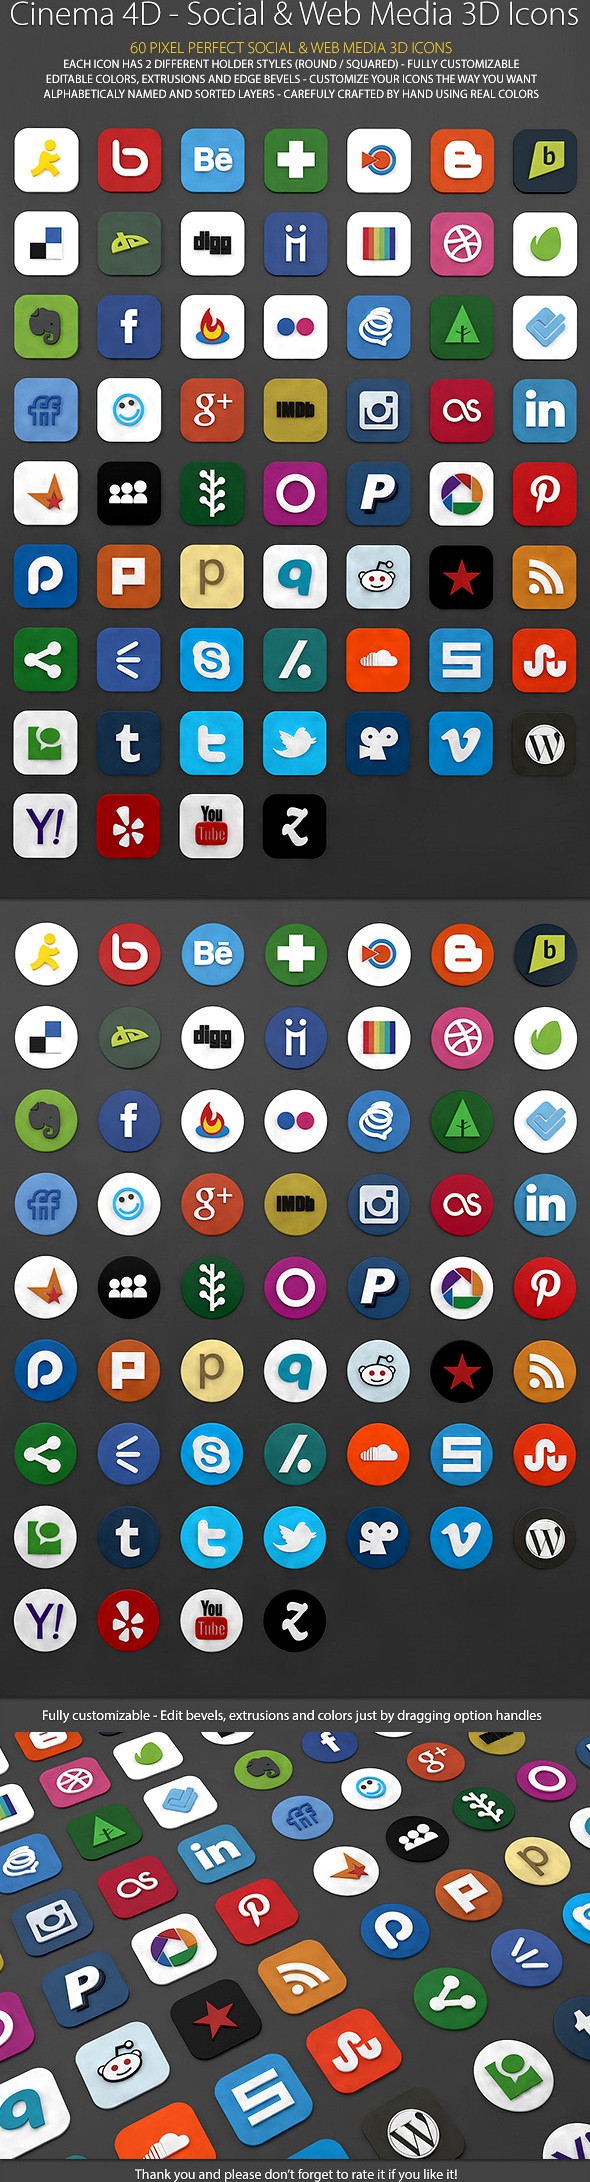 60 Web and Social Media 3D Icons